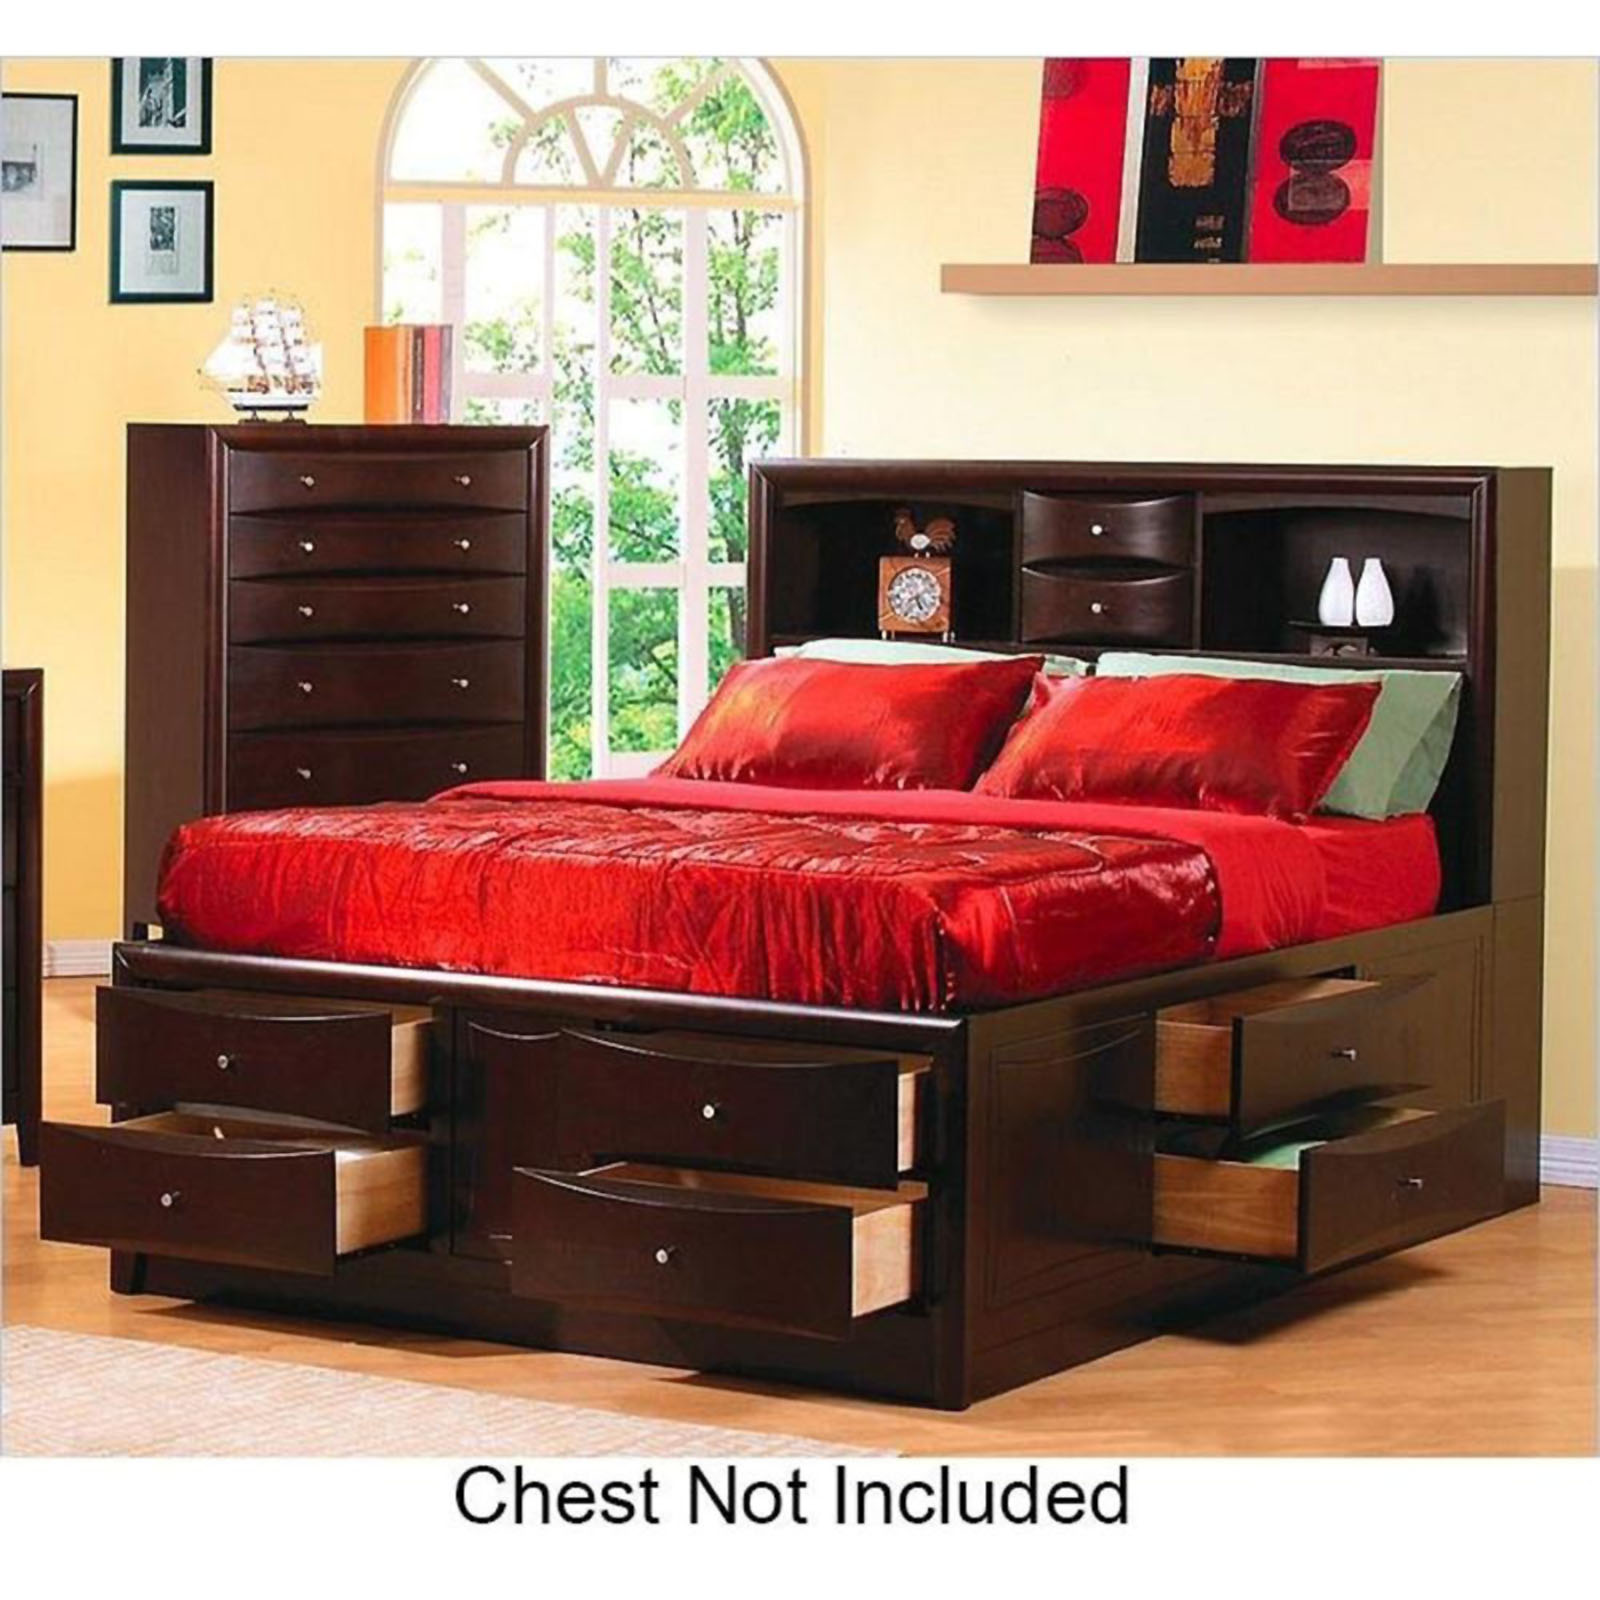 Coaster Queen Size Bookcase Bed with Storage Drawers - Cappuccino